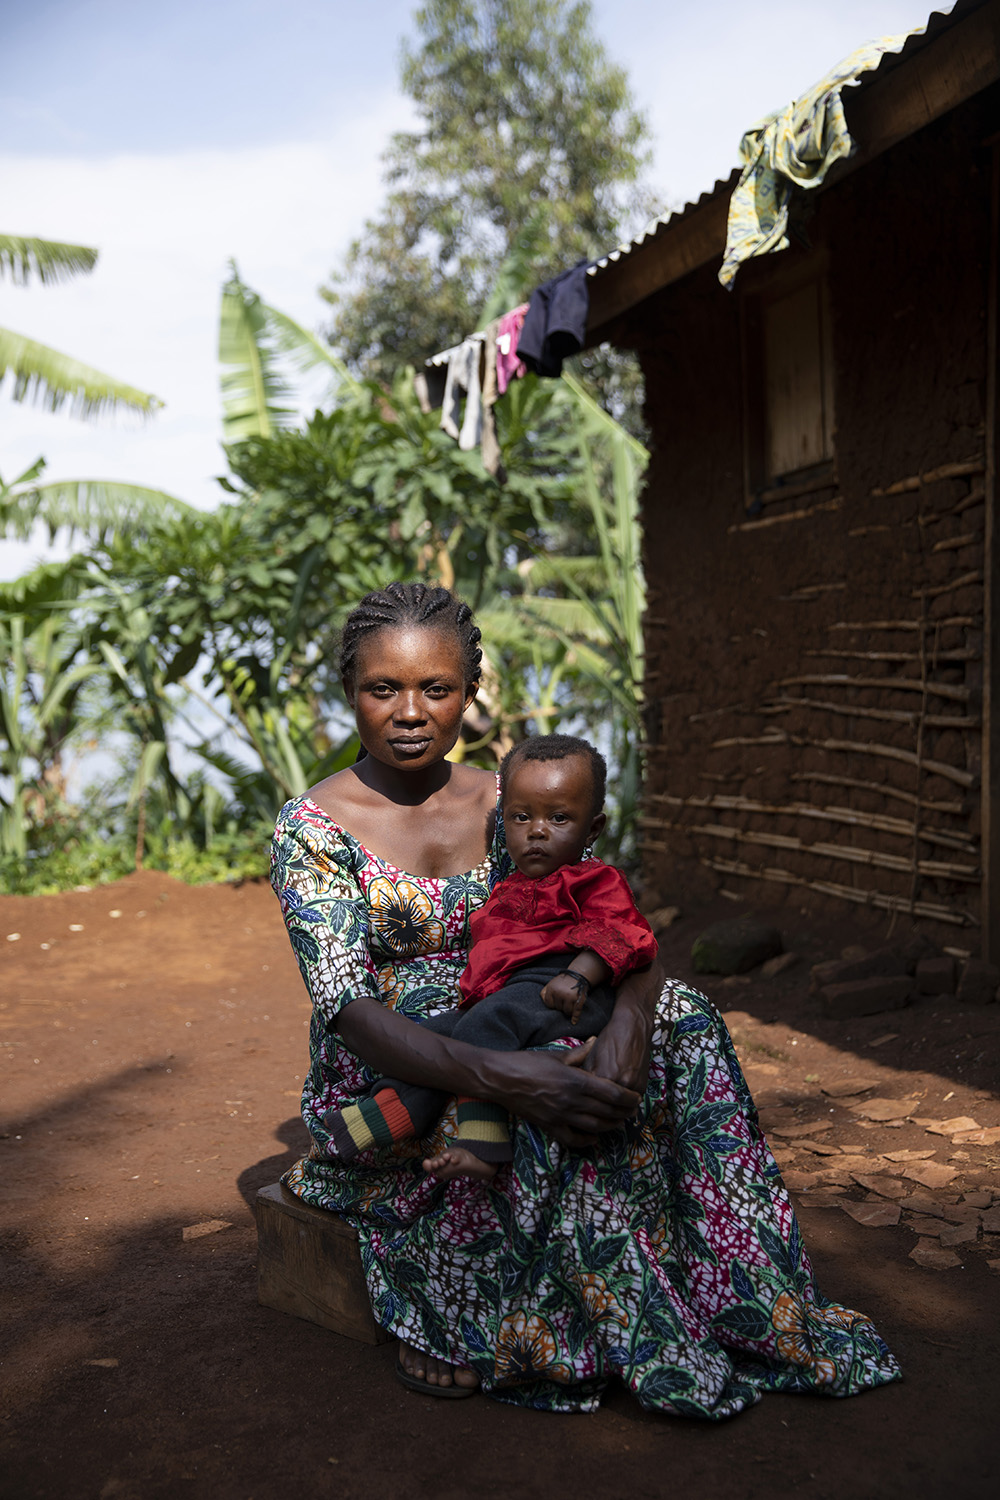 Cadette, 25, had her first child at 11; when we met, she was pregnant with her seventh. Her village in South Kivu, Democratic Republic of Congo, had flooded, so she was now living in a temporary settlement, squeezed into a two room house with her six children, her grandmother and her seven siblings who, as the eldest, she was also looking after. She had so much energy and an amazing sense of humour. The settlement is supported by UNHCR.